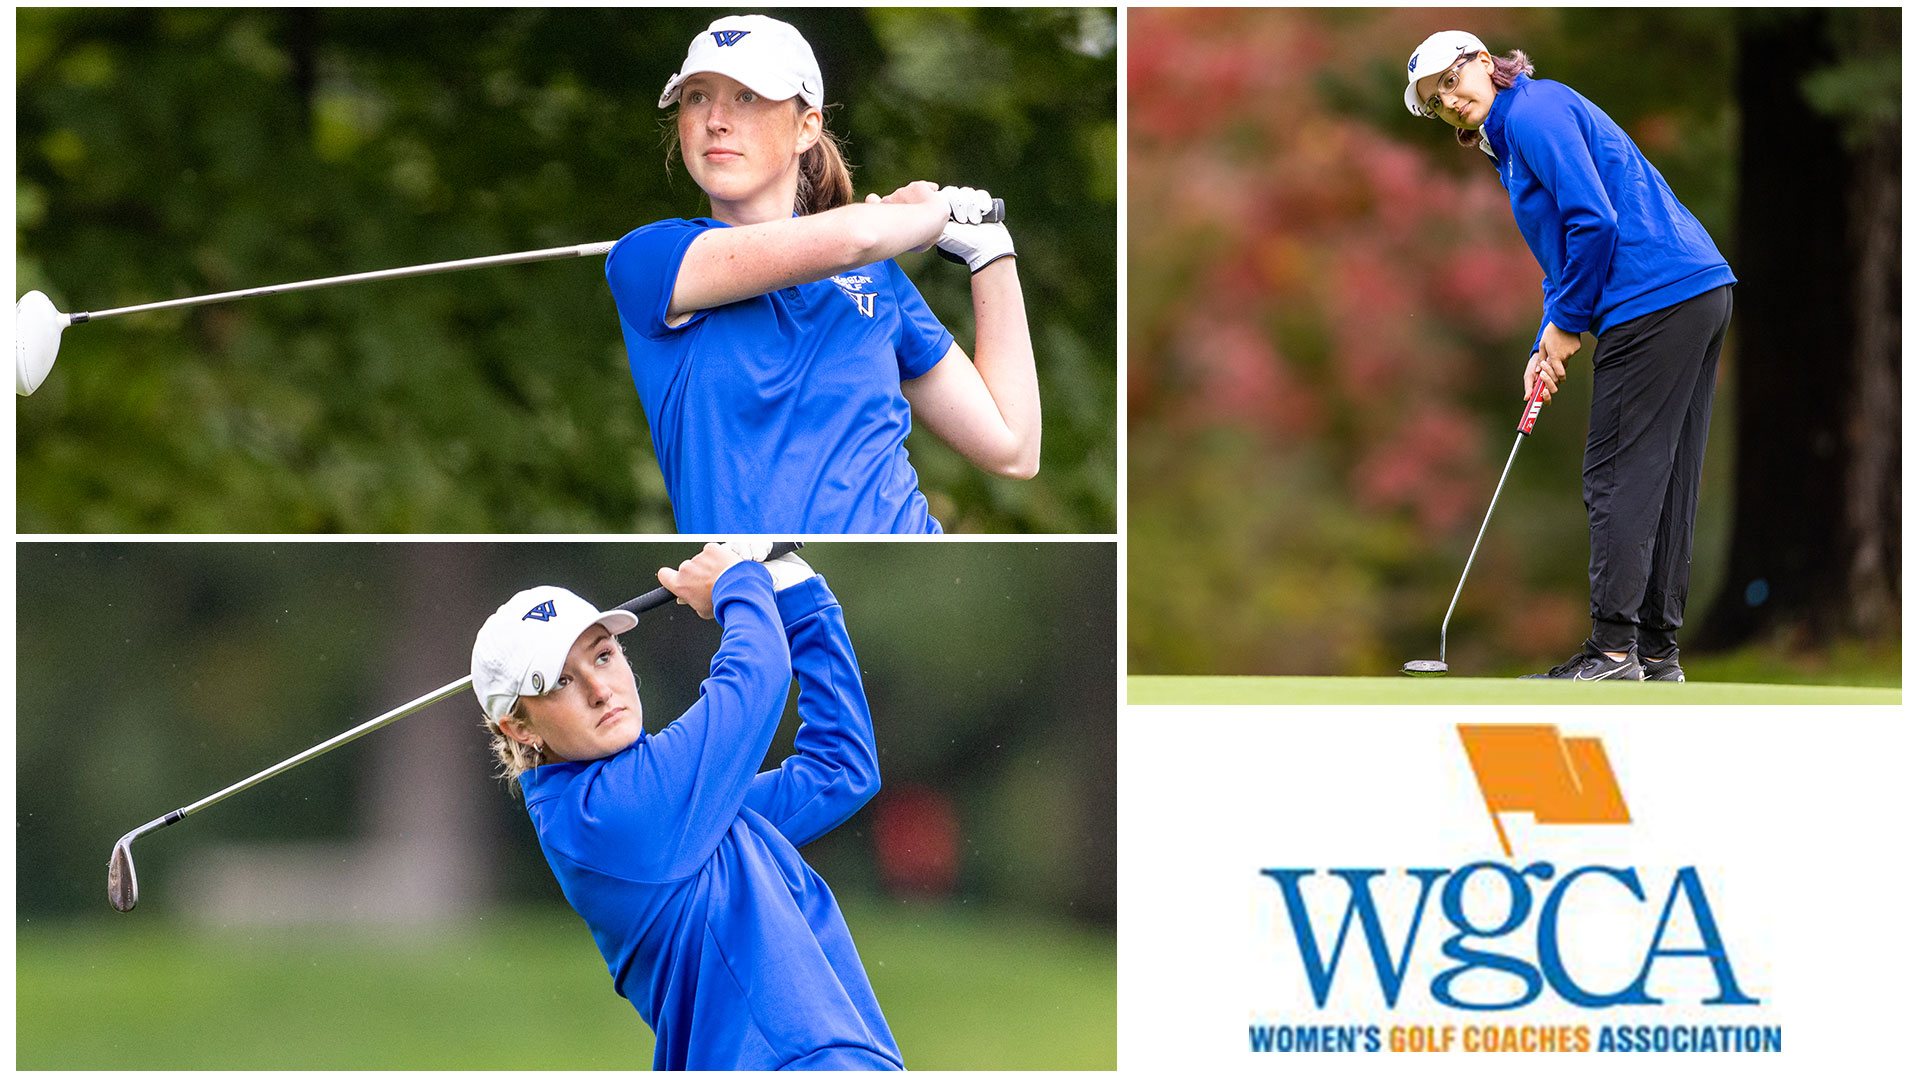 MacVicar (top left), Warburg (bottom left) and Kenwood (right) were each recognized by the WGCA (Frank Poulin Photography).